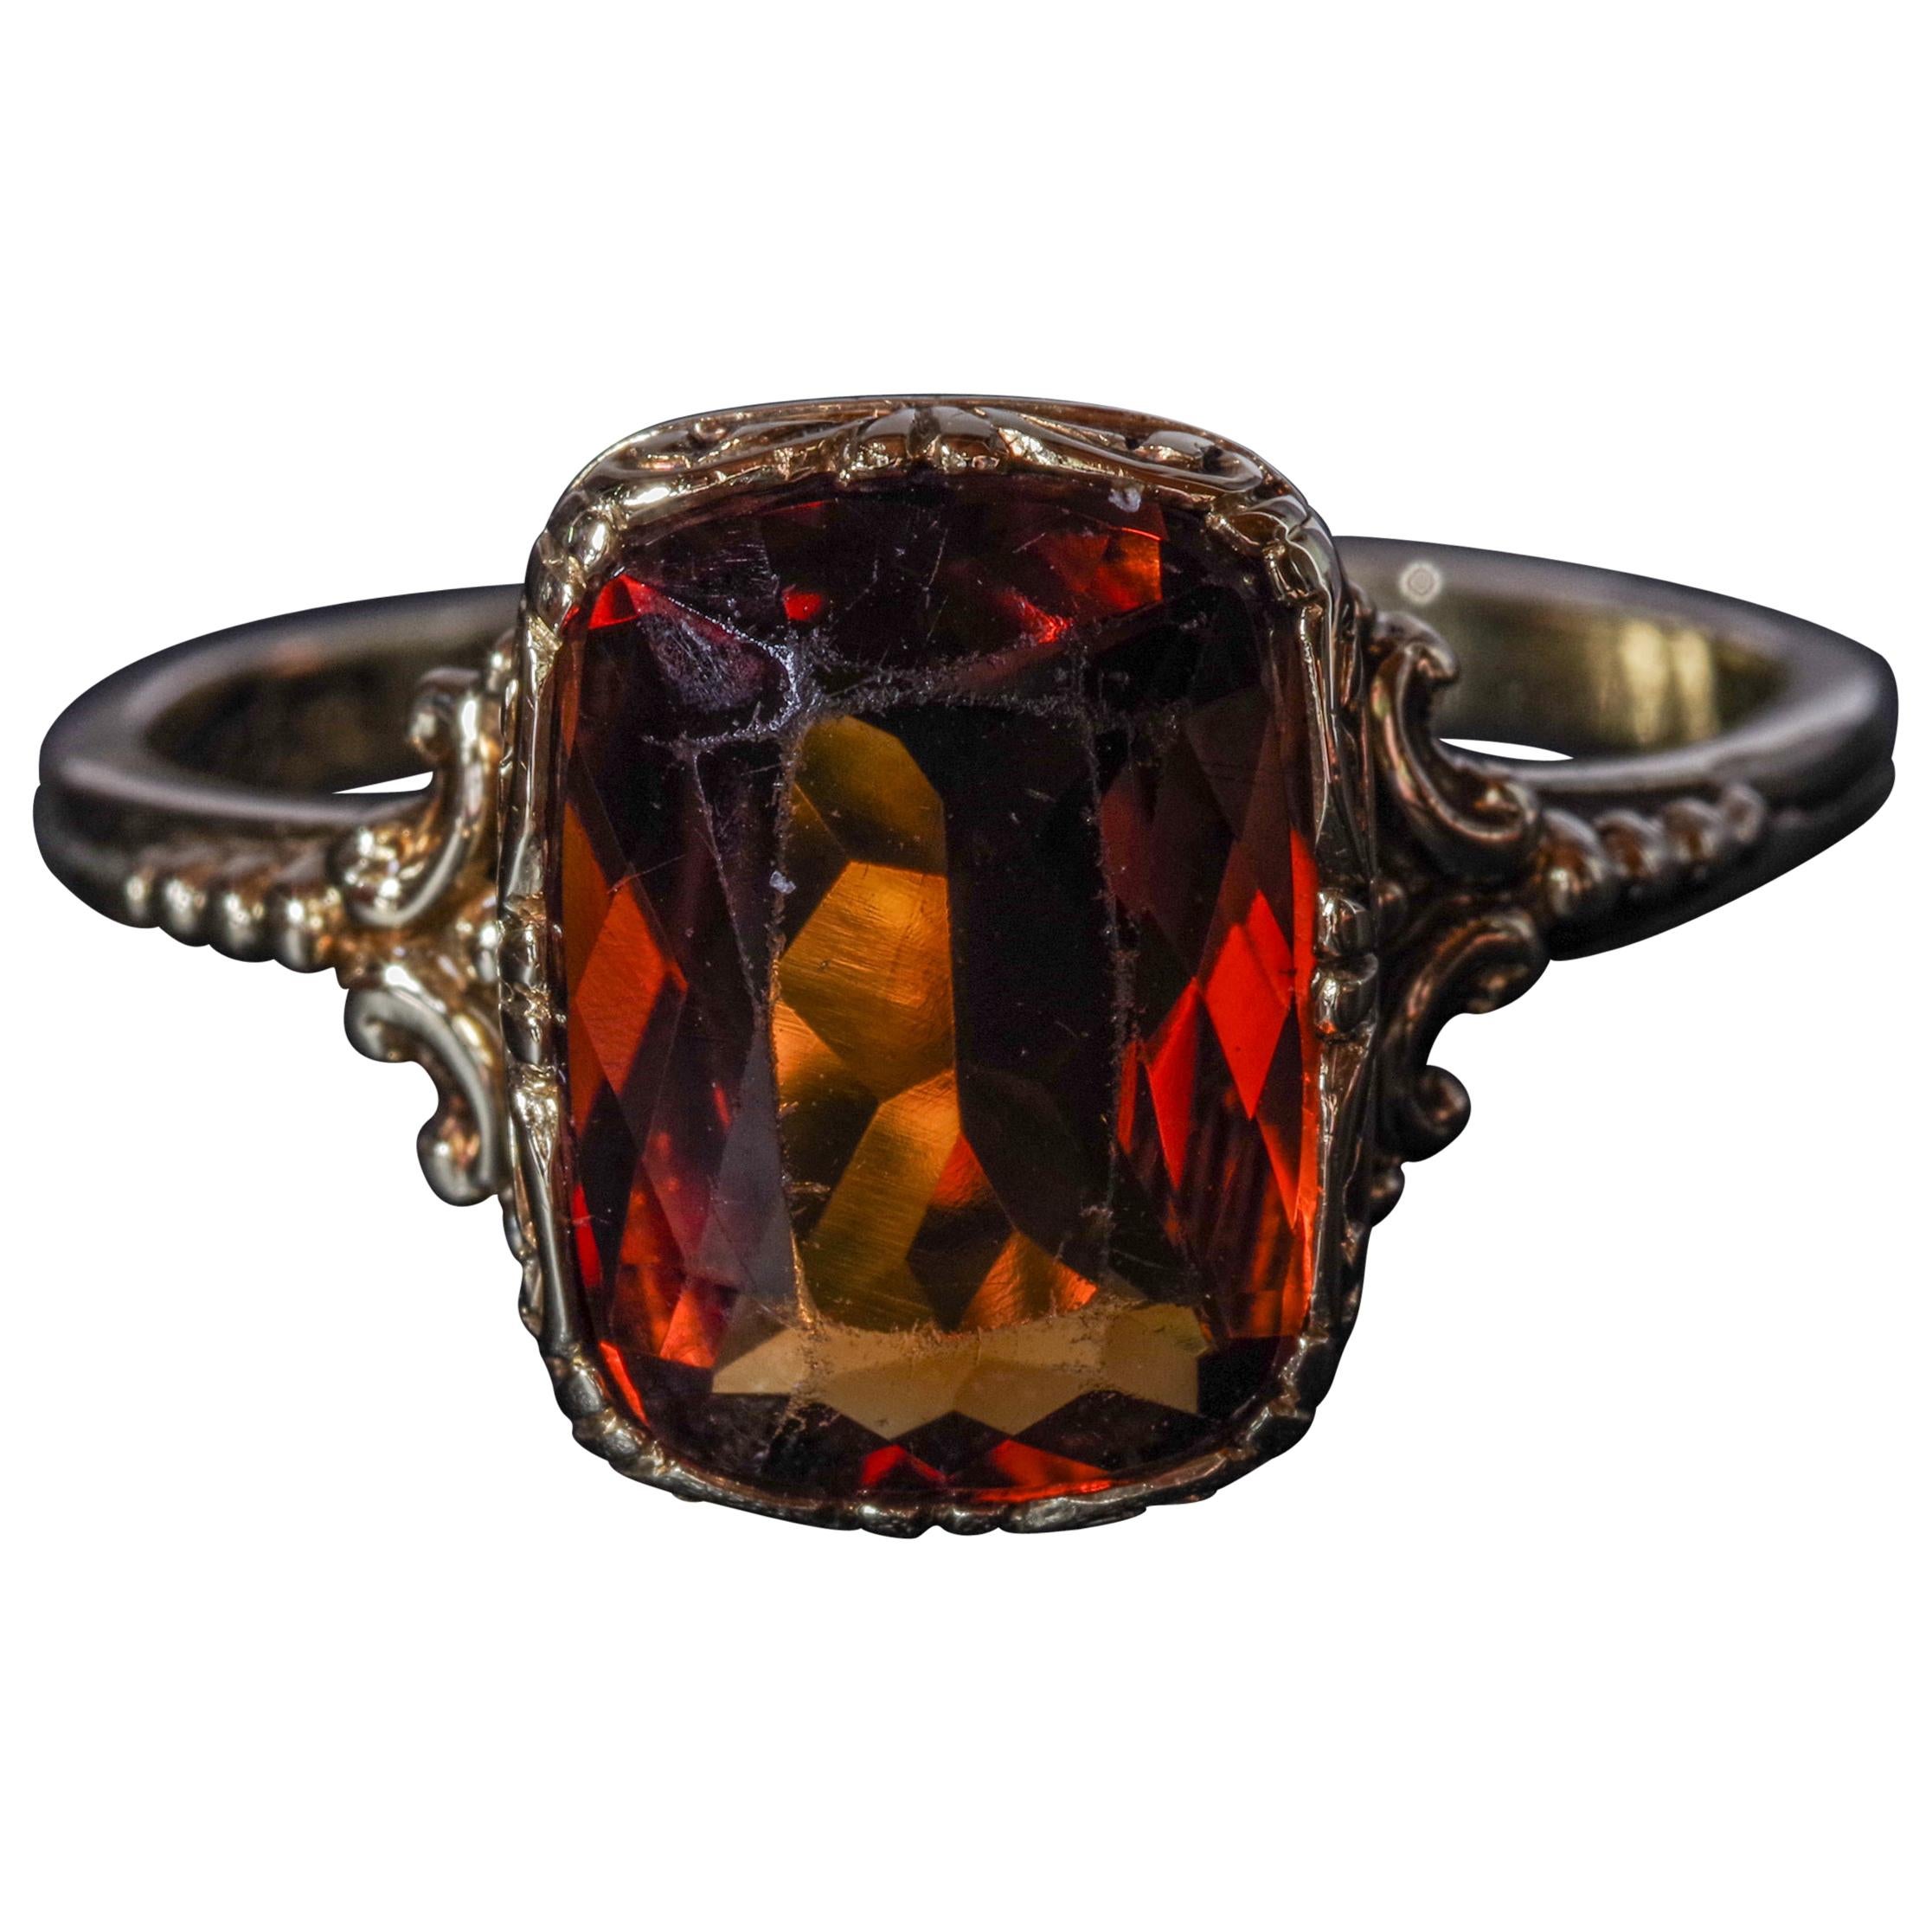 Antique Madeira Citrine Gent's Ring from Europe